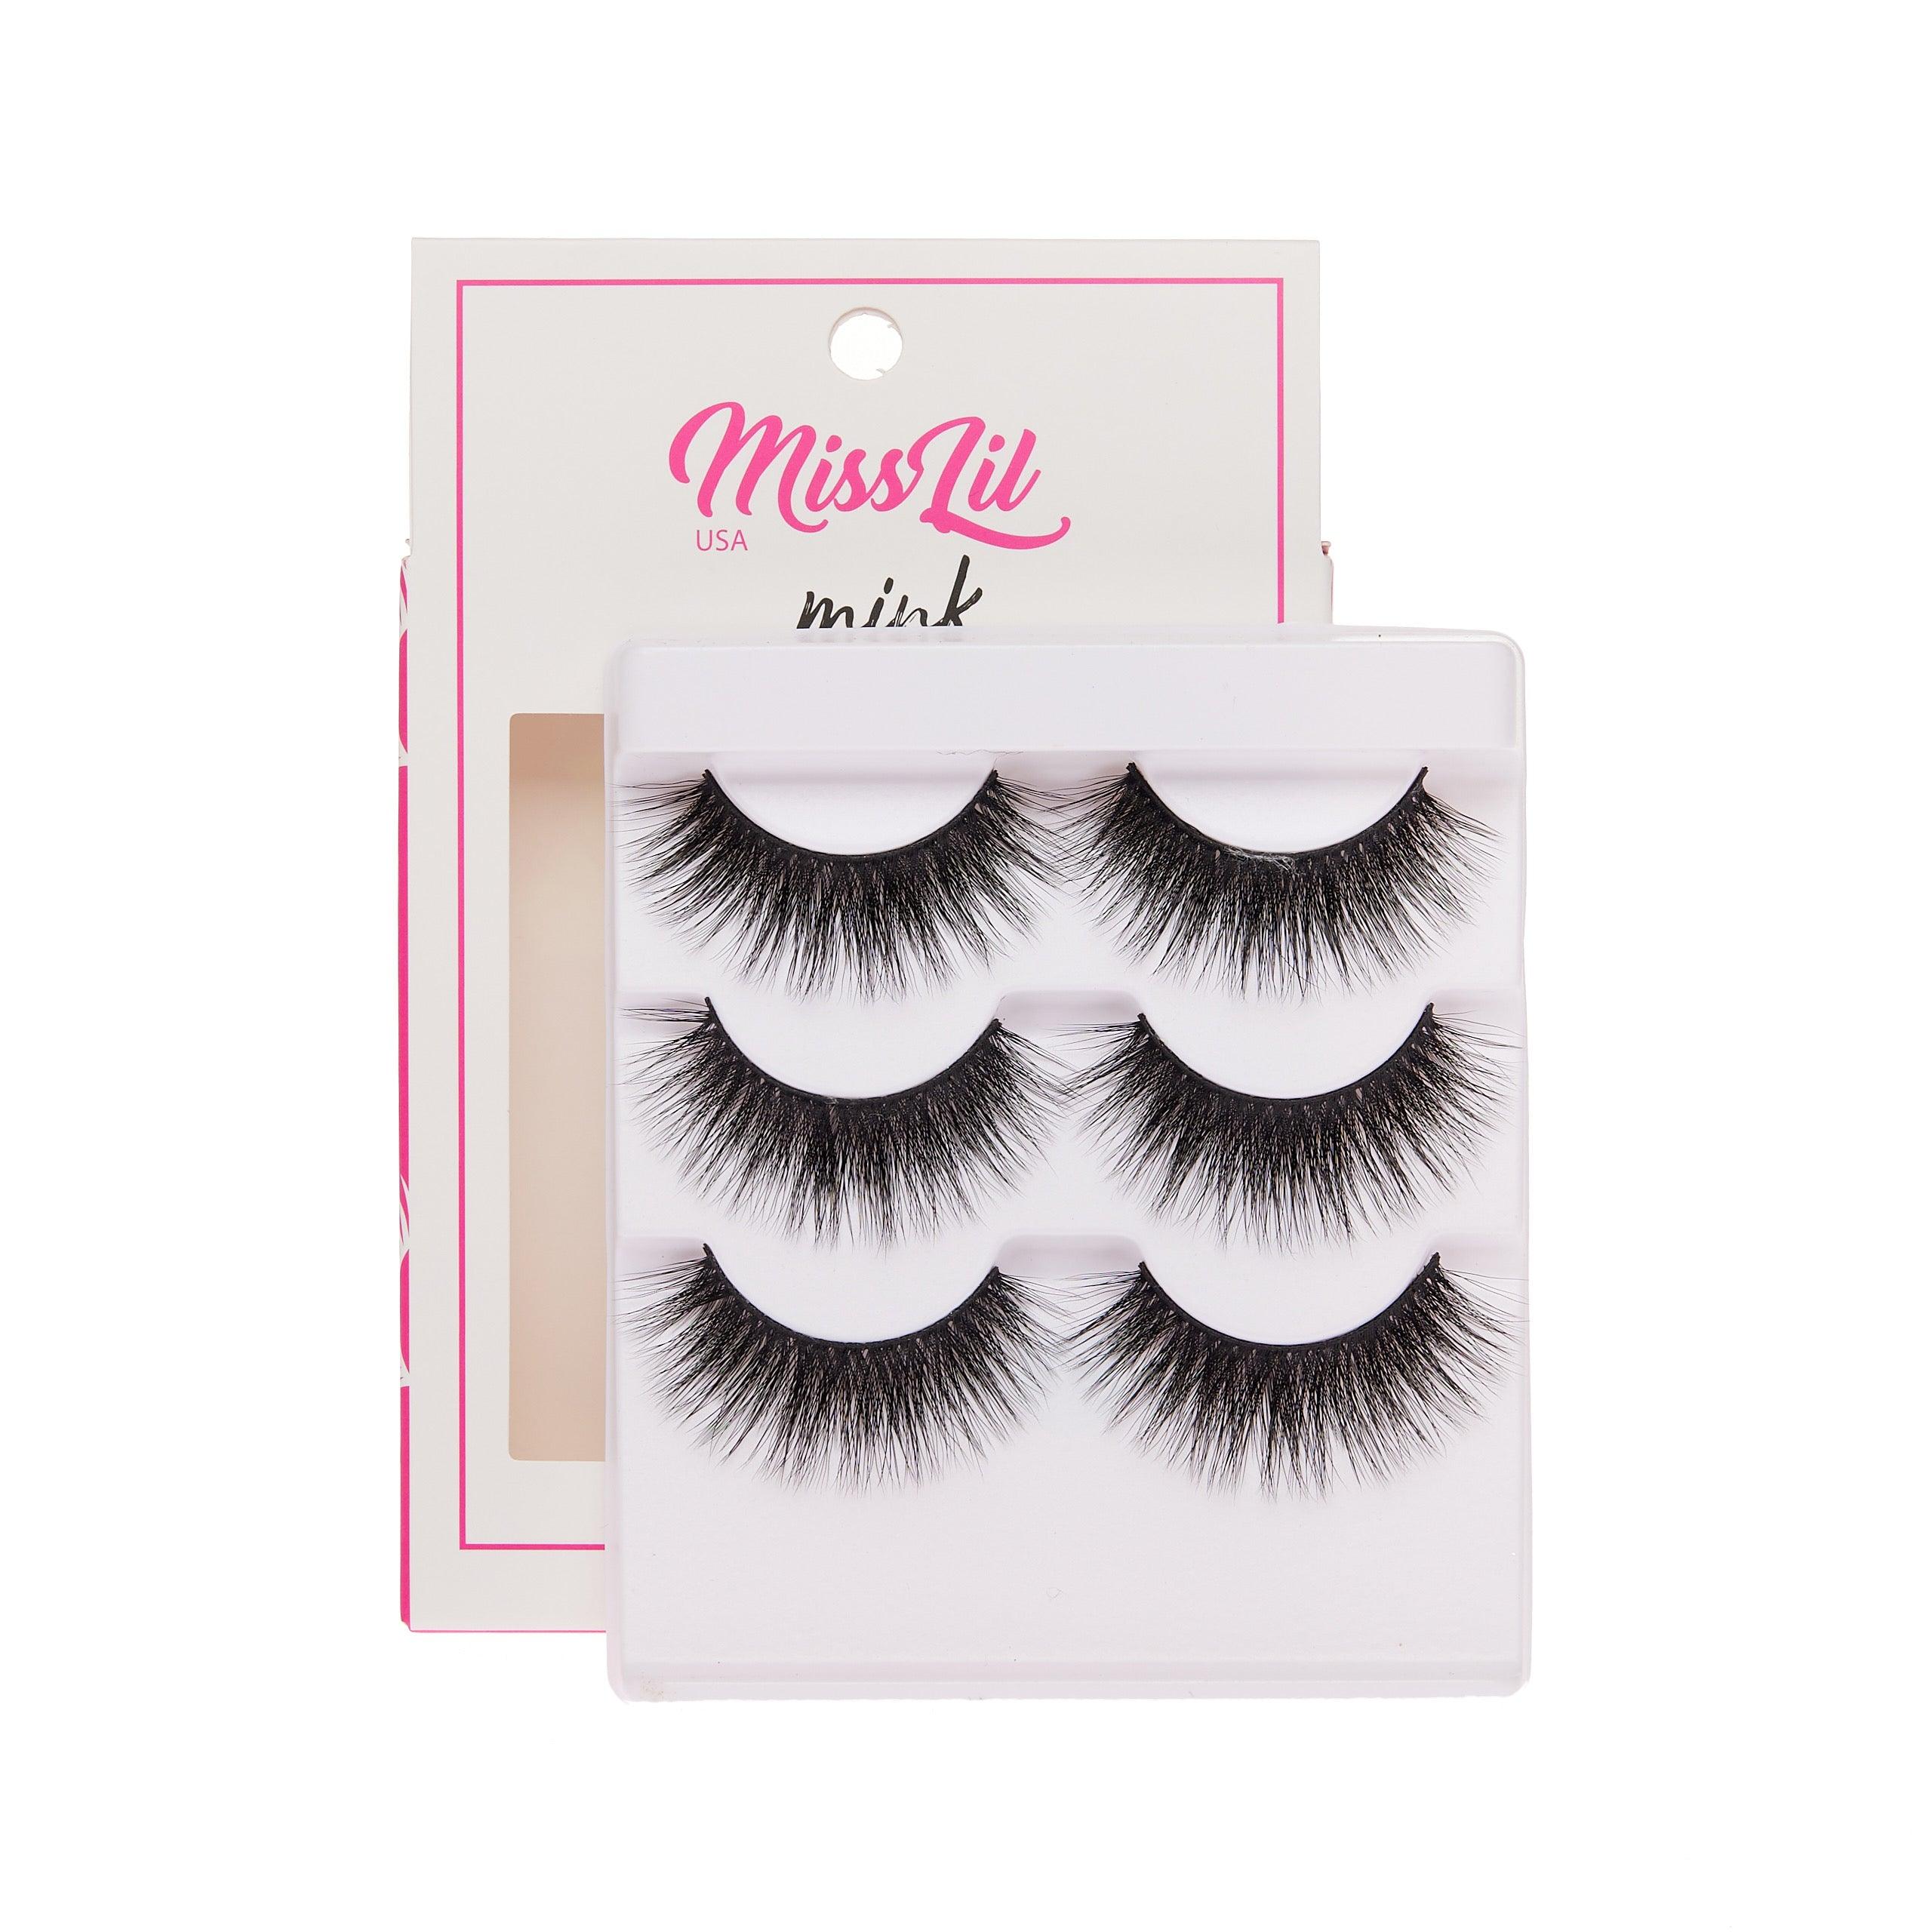 3-Pair Faux Mink Effect Eyelashes - Lash Party Collection #6 - Pack of 3 - Miss Lil USA